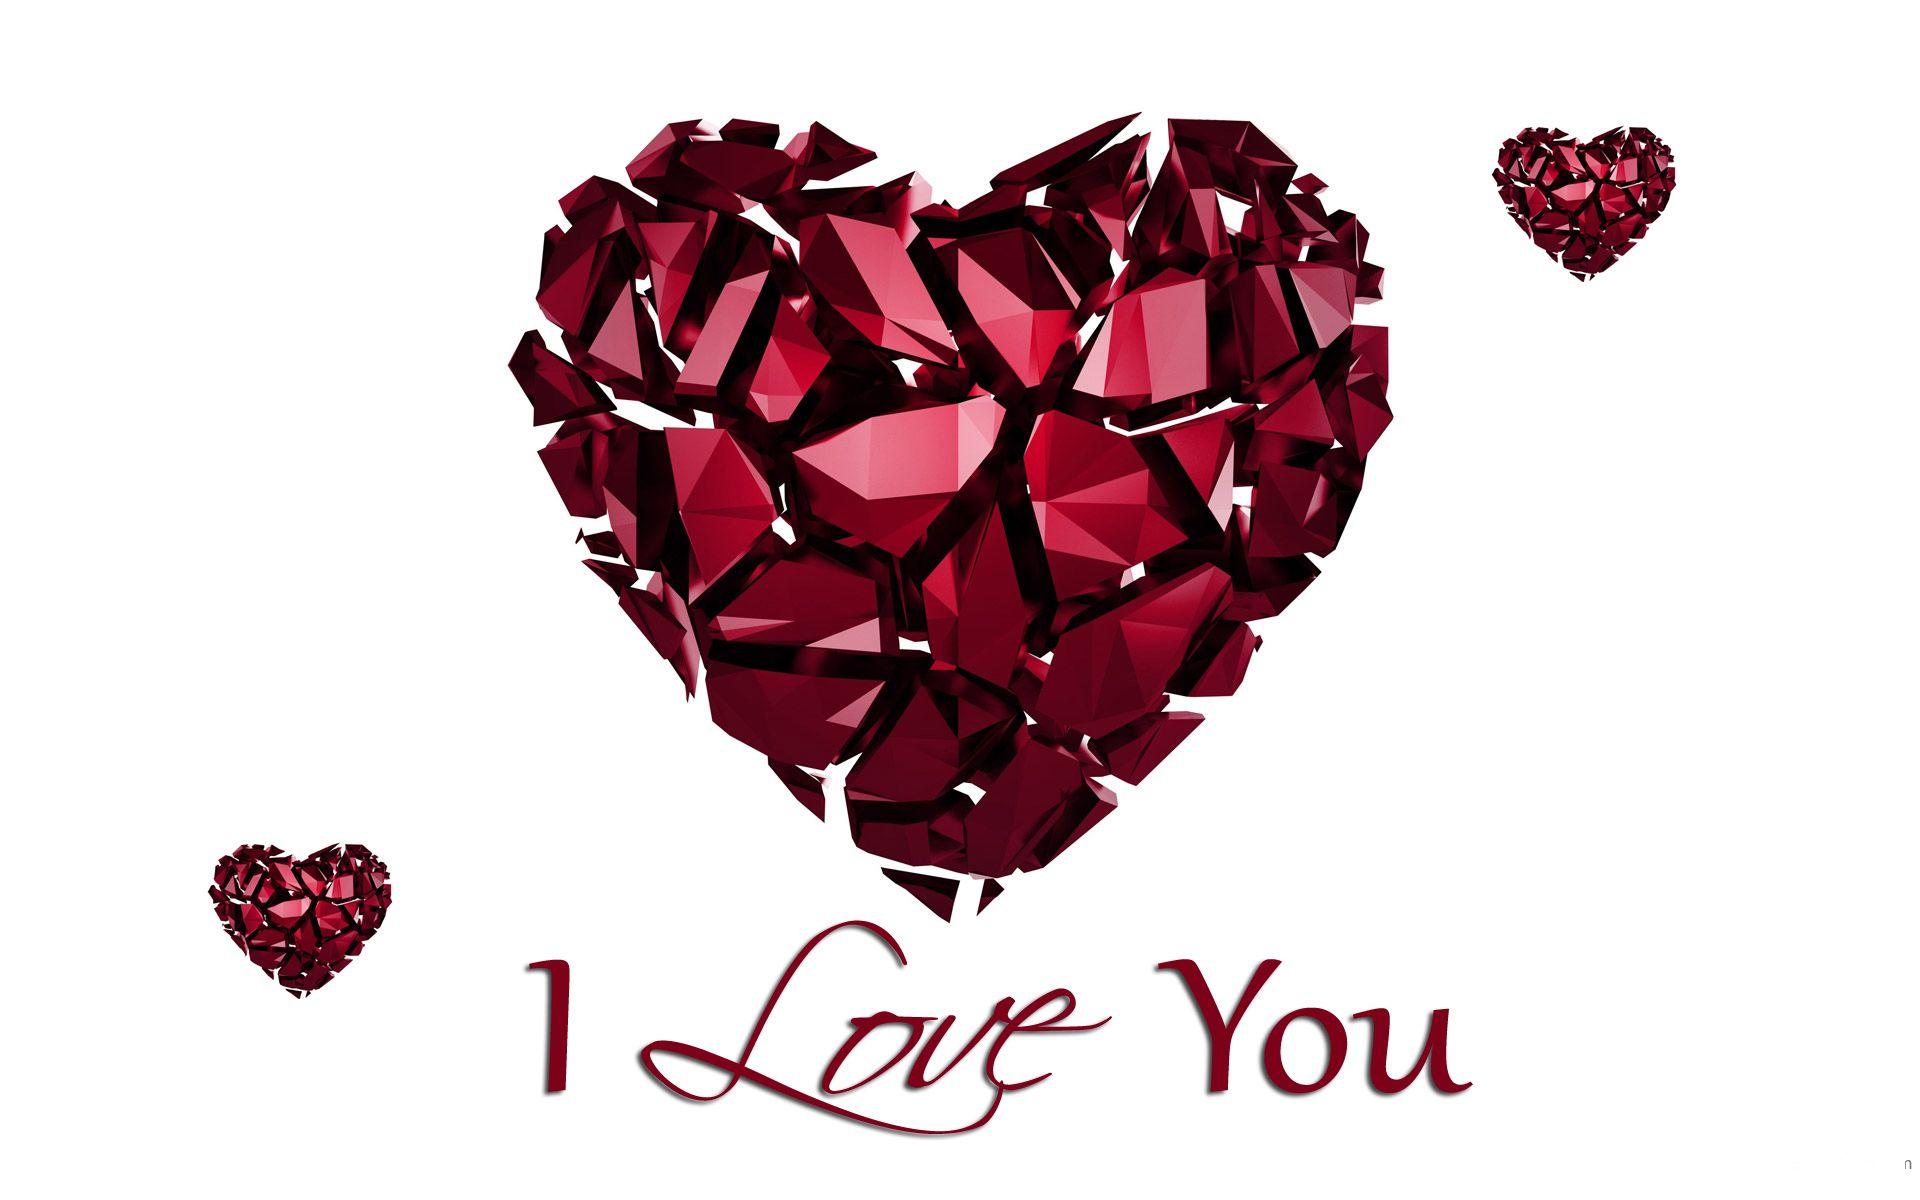 Love Your Heart Logo - Free Heart Images Love You, Download Free Clip Art, Free Clip Art on ...